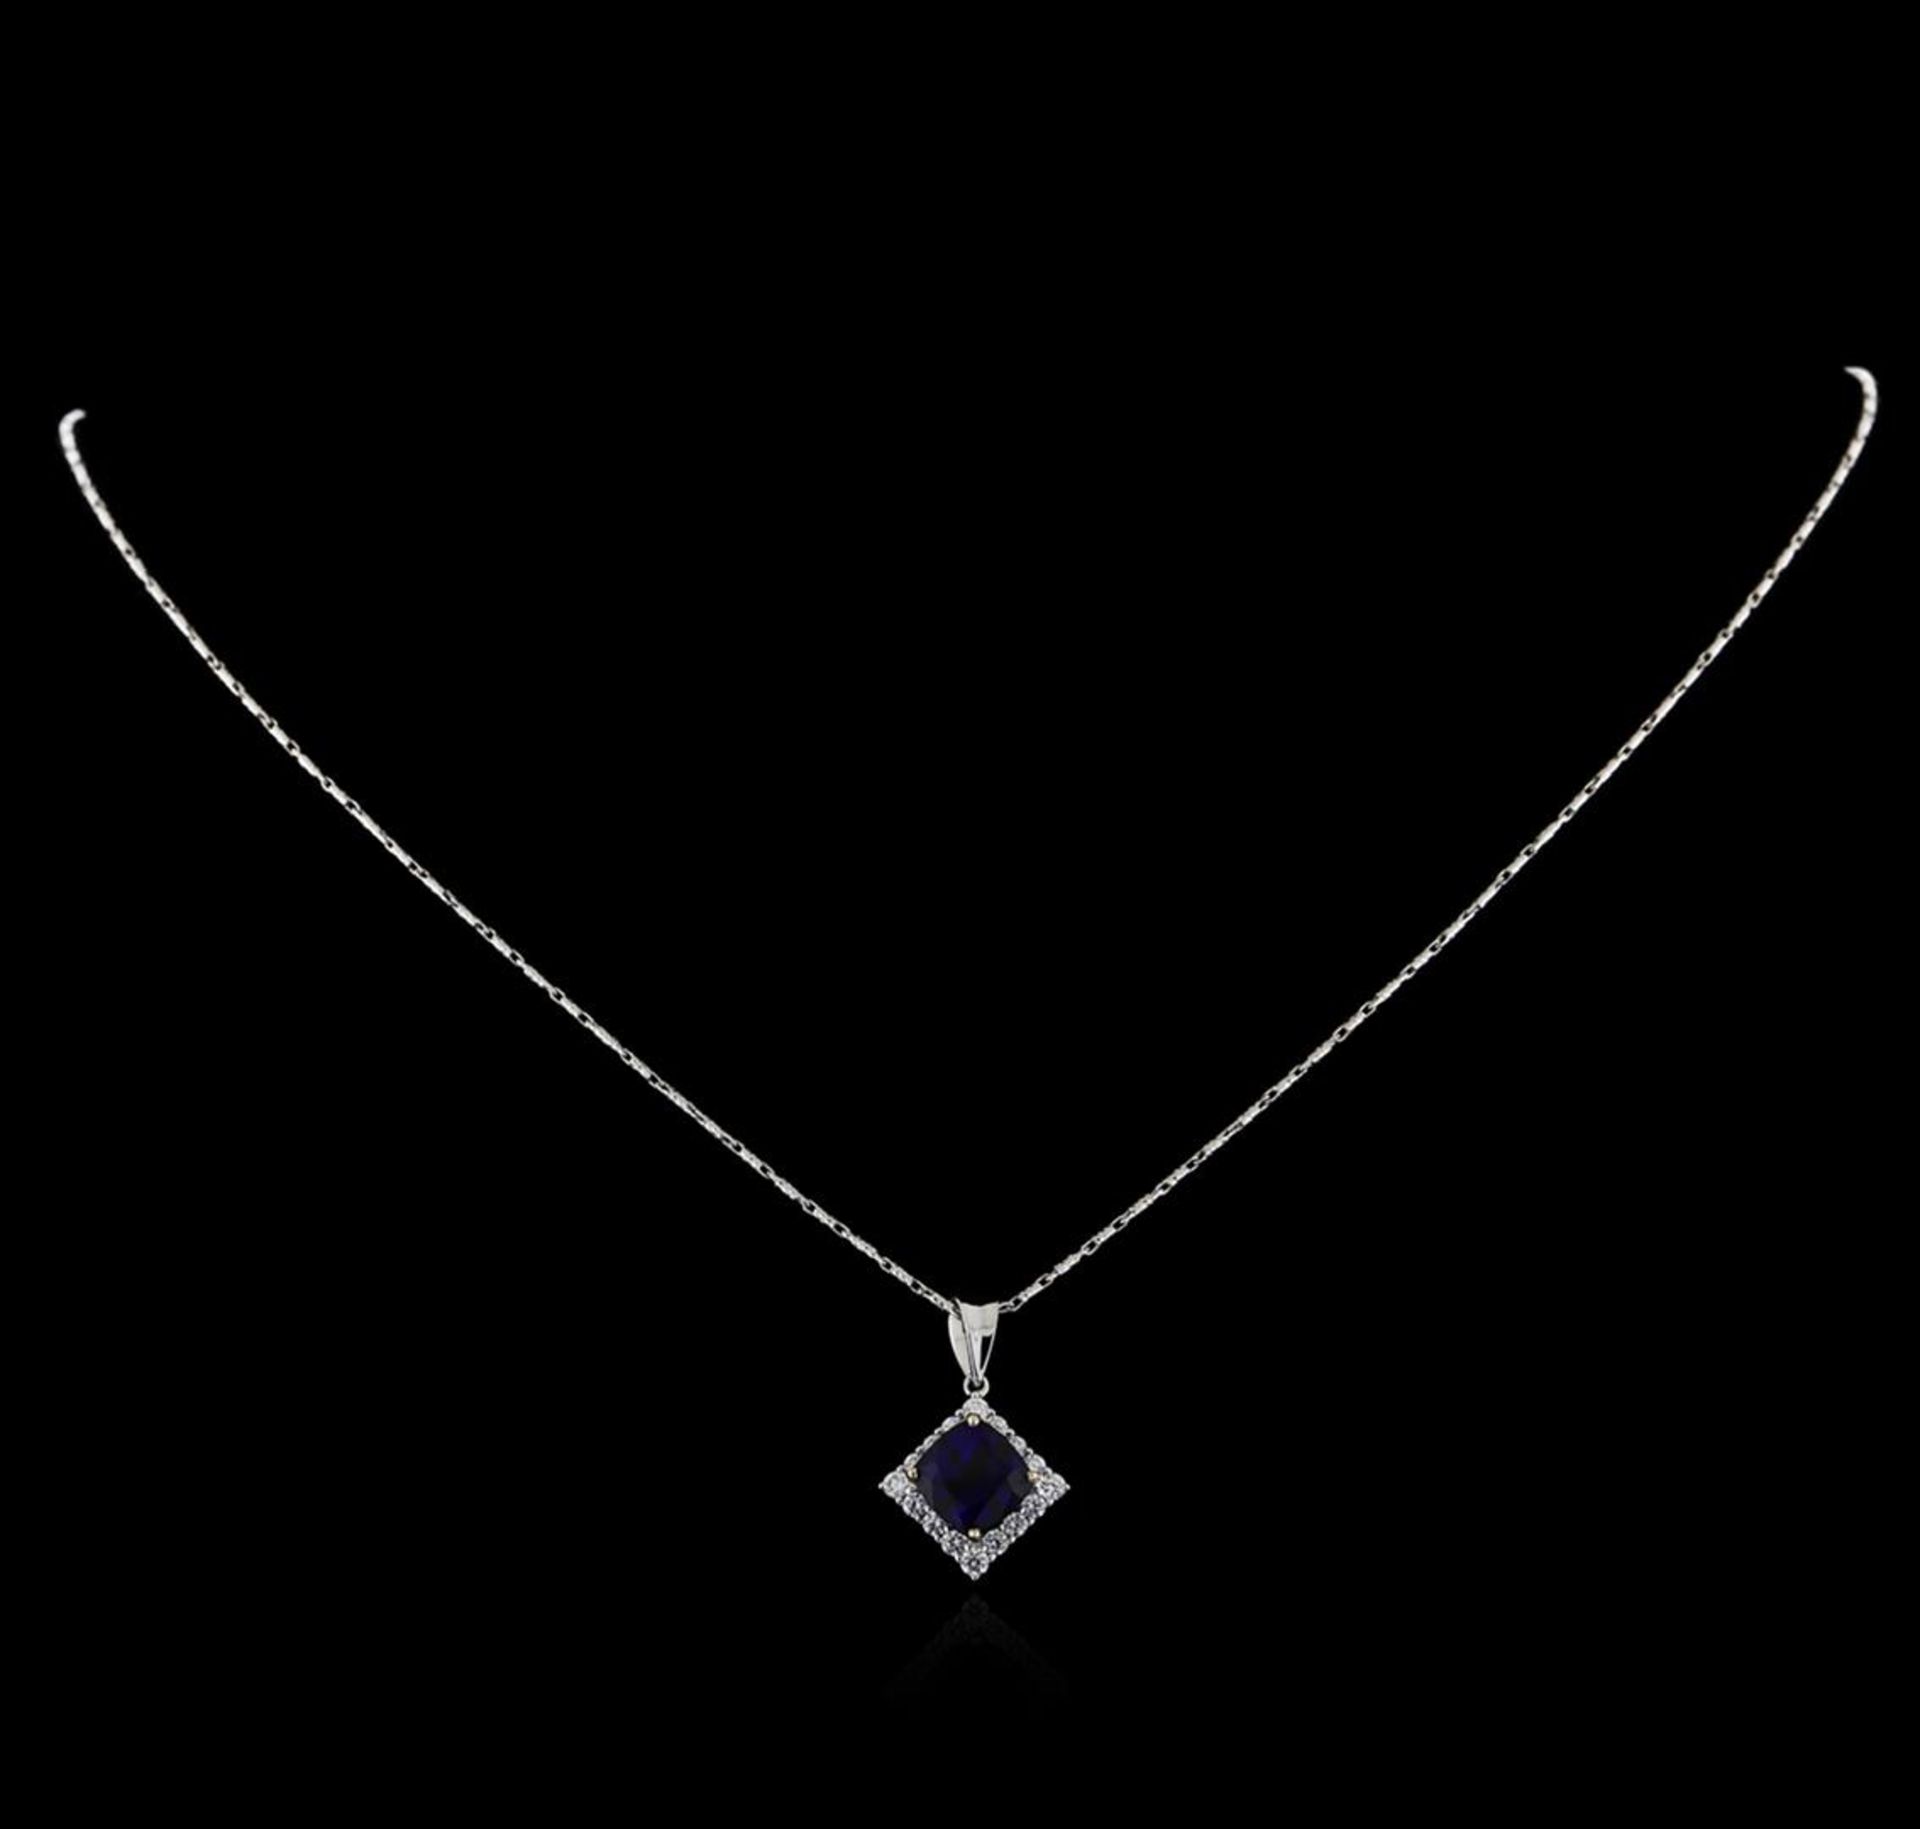 18KT White Gold 3.18 ctw Sapphire and Diamond Pendant With Chain - Image 2 of 3